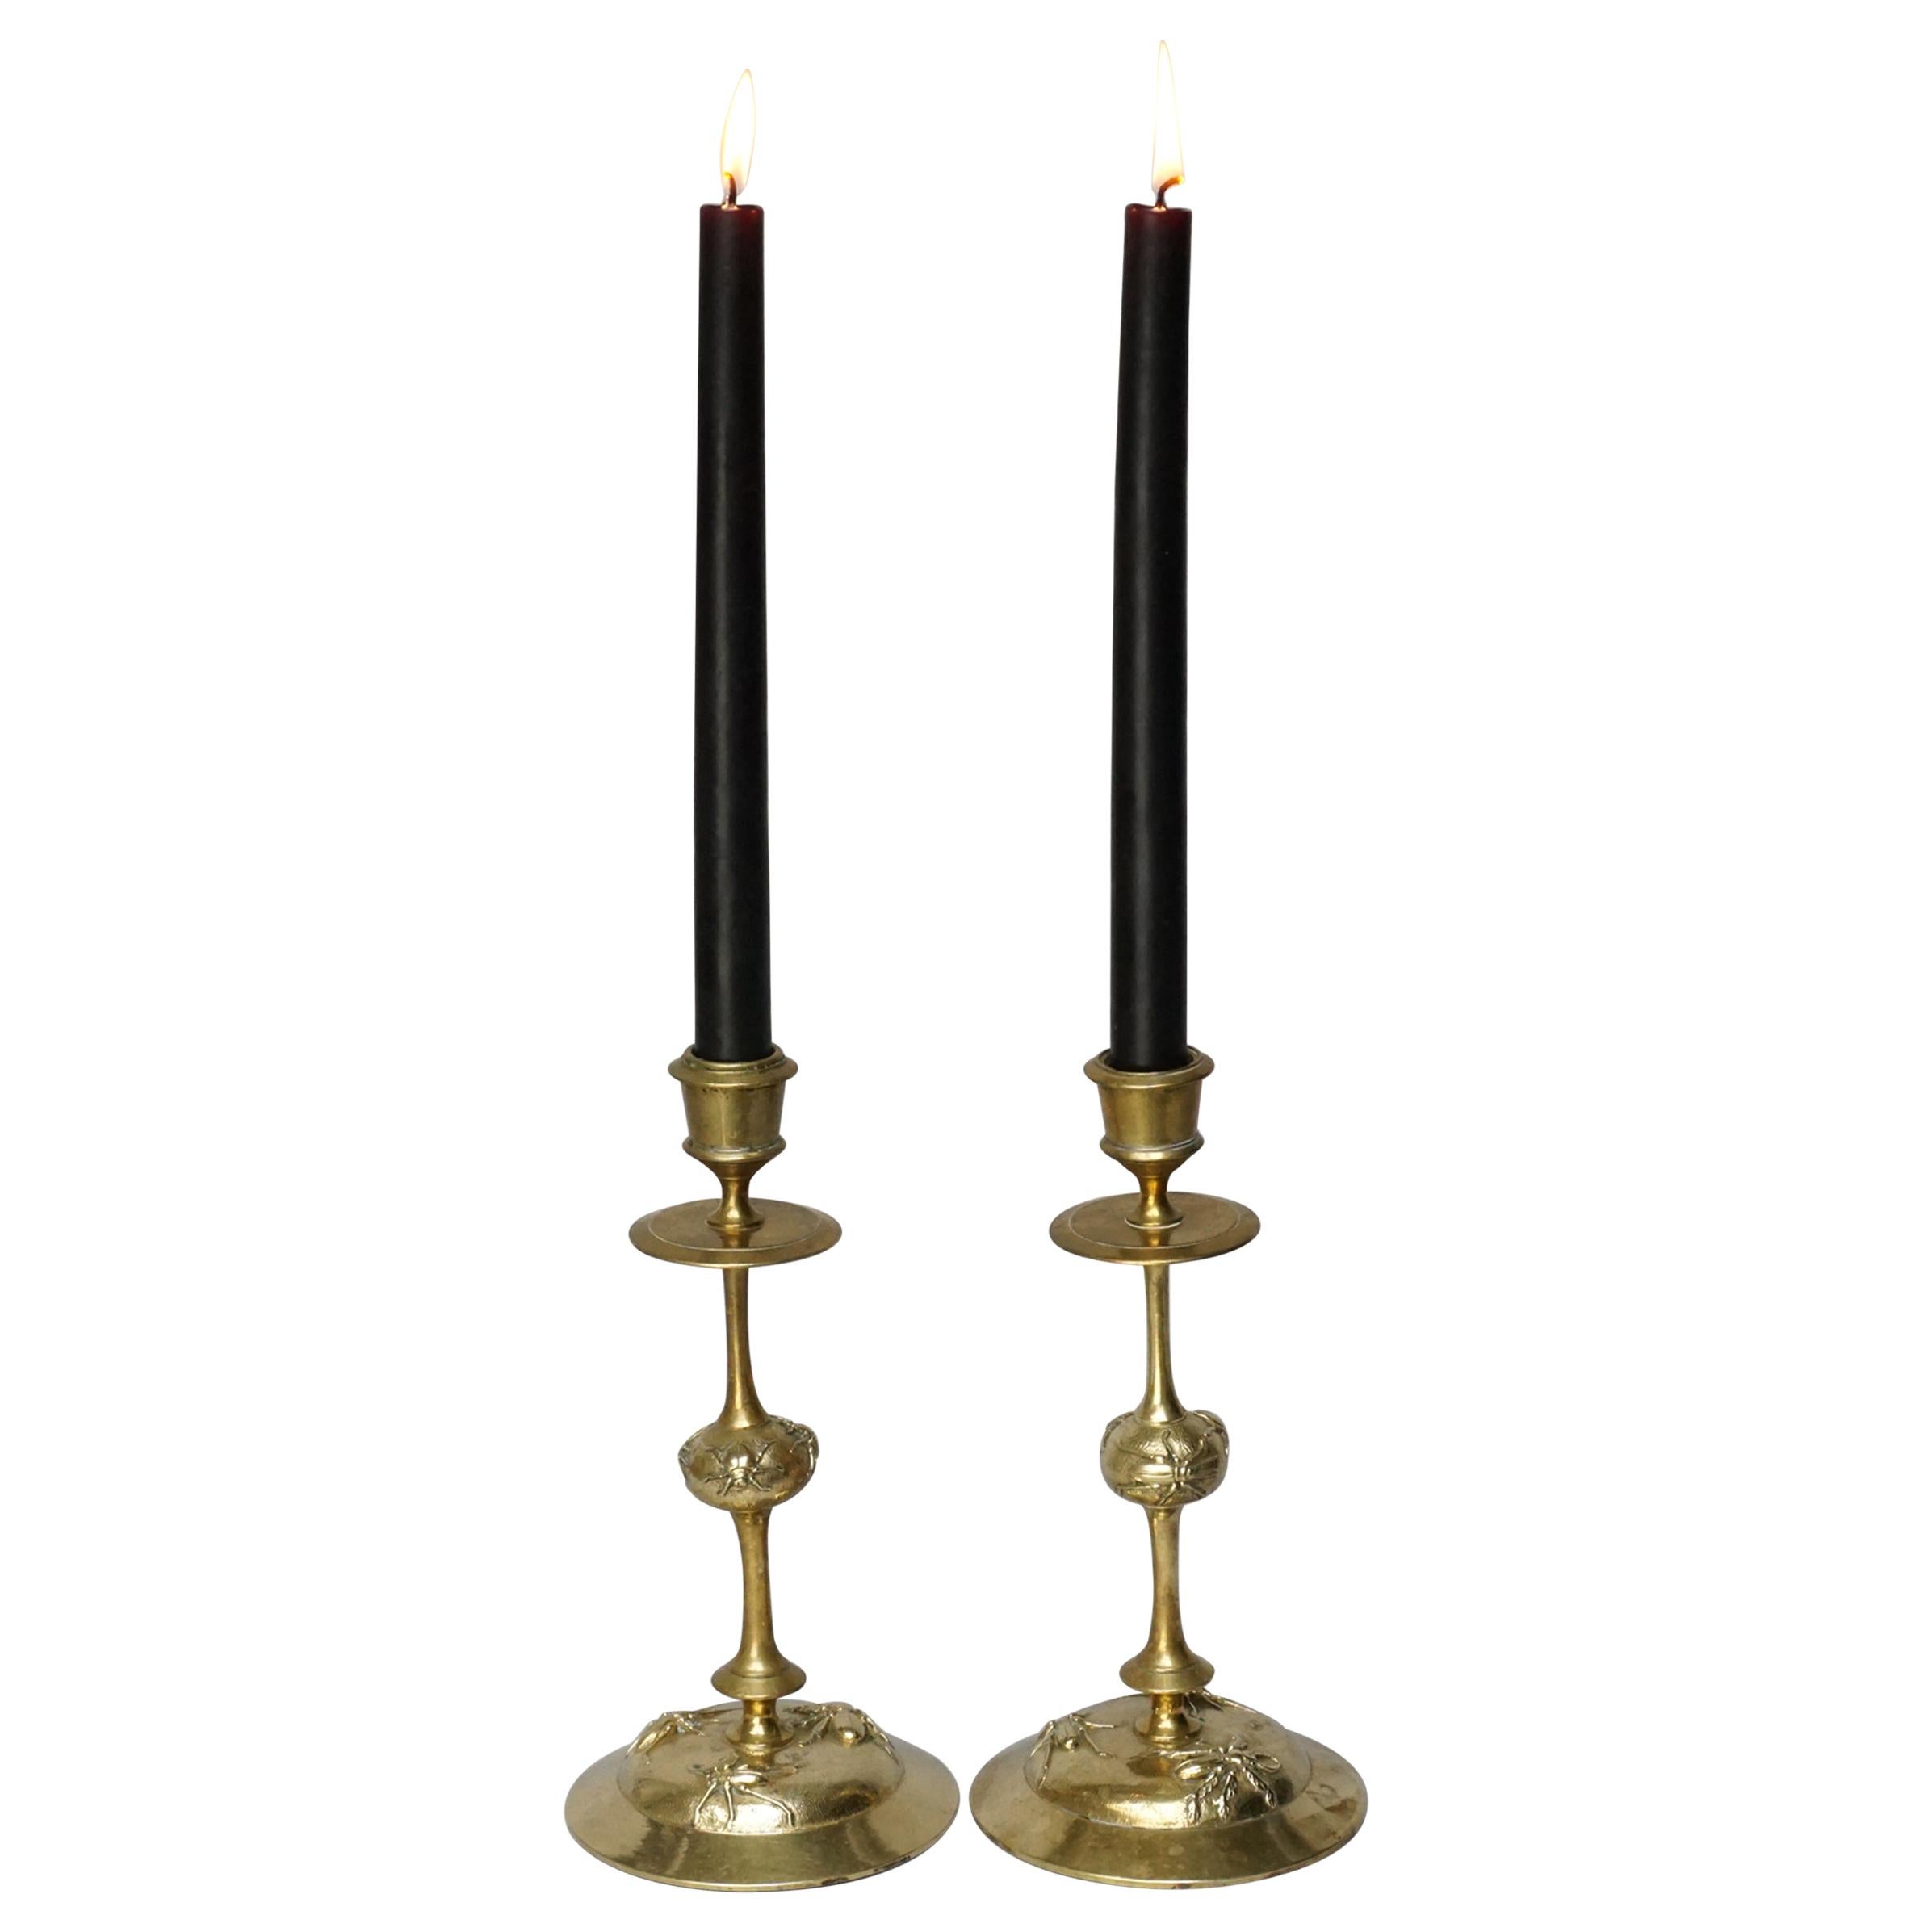 19th Century French Brass Candle Holders, Candlesticks with Beetle Decoration